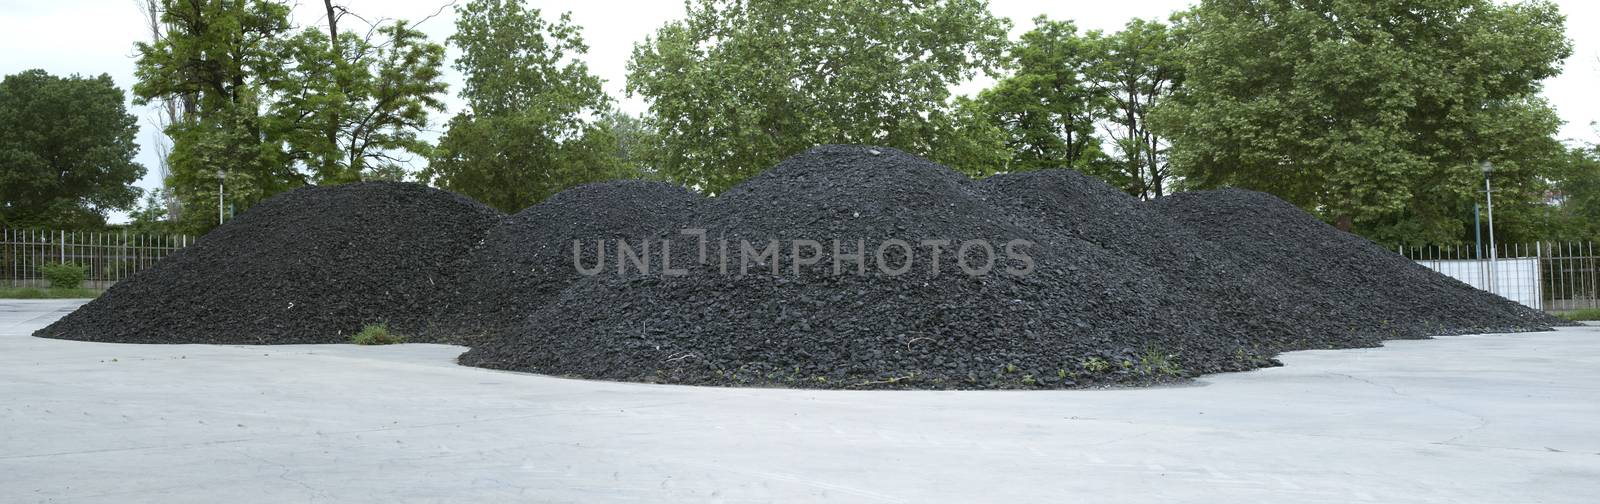 Combustion coal pile